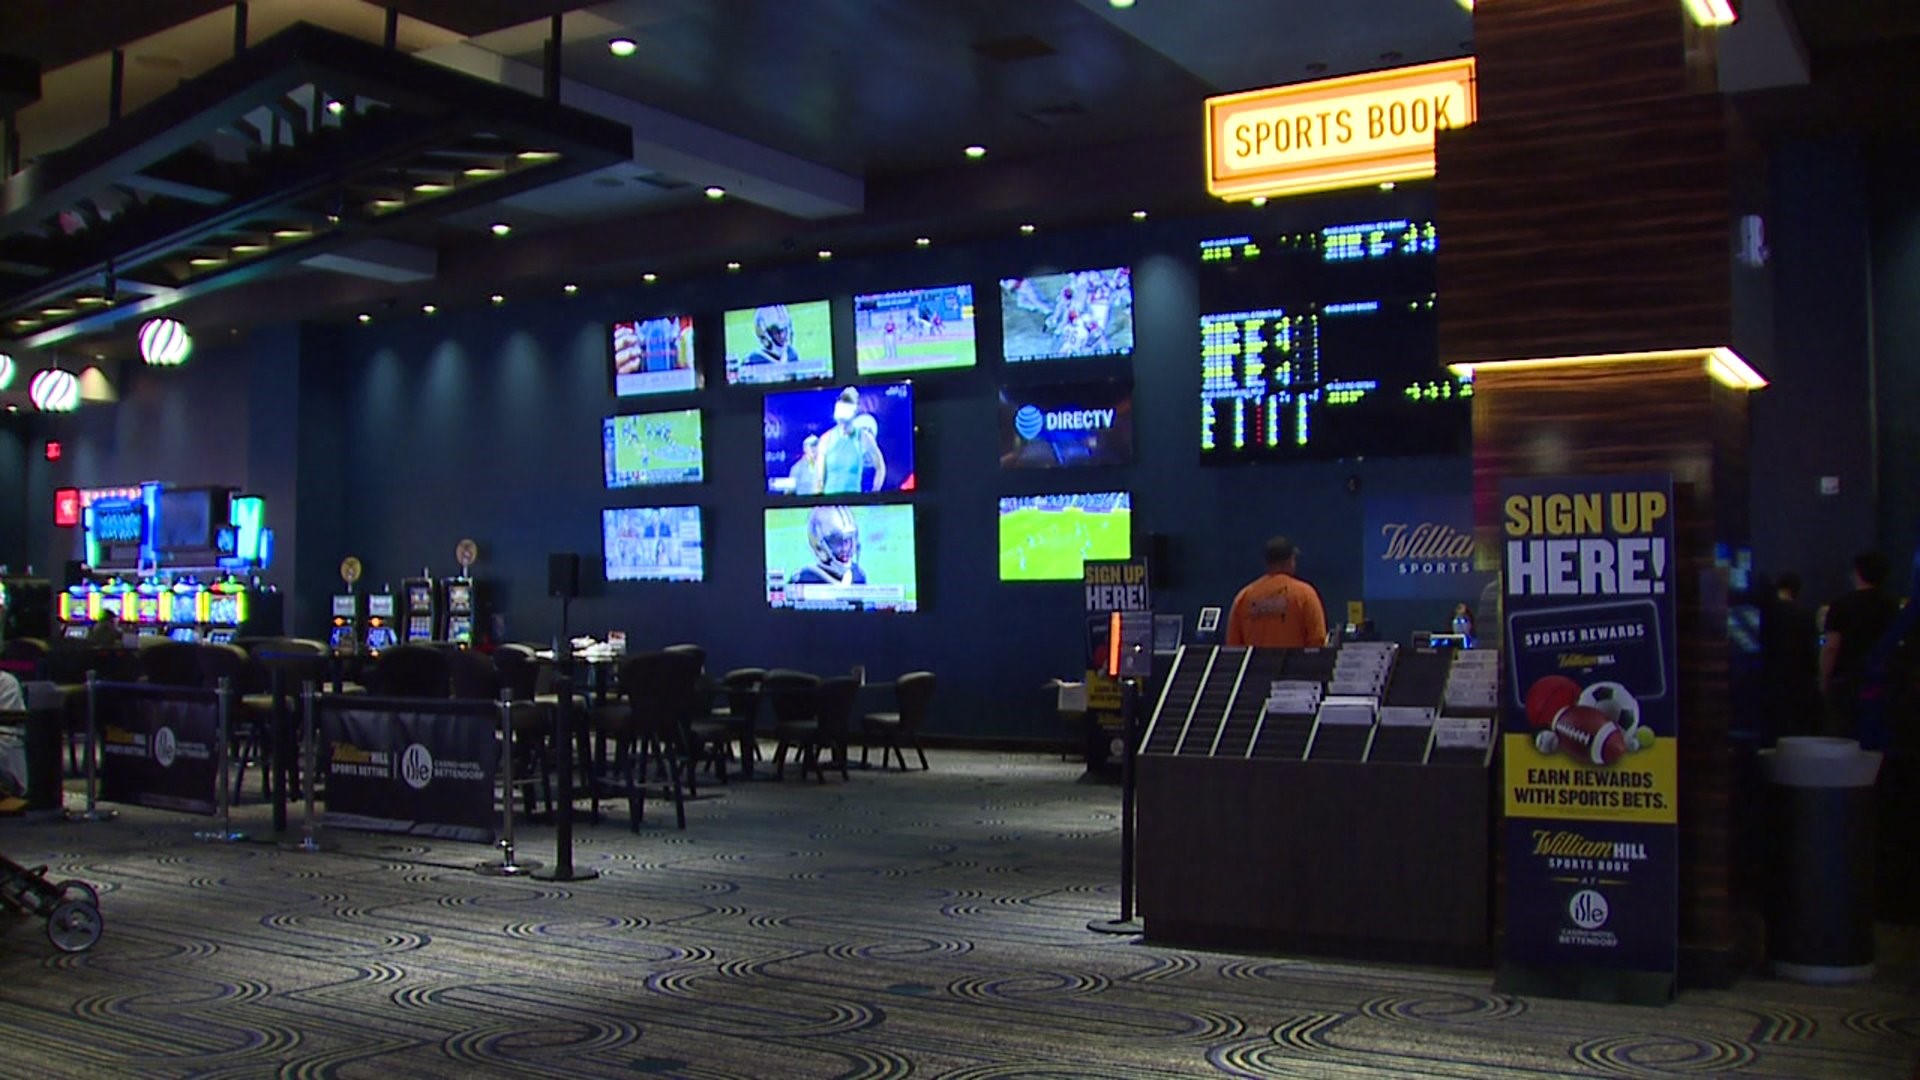 Iowa brings in thousand after one month of sports betting